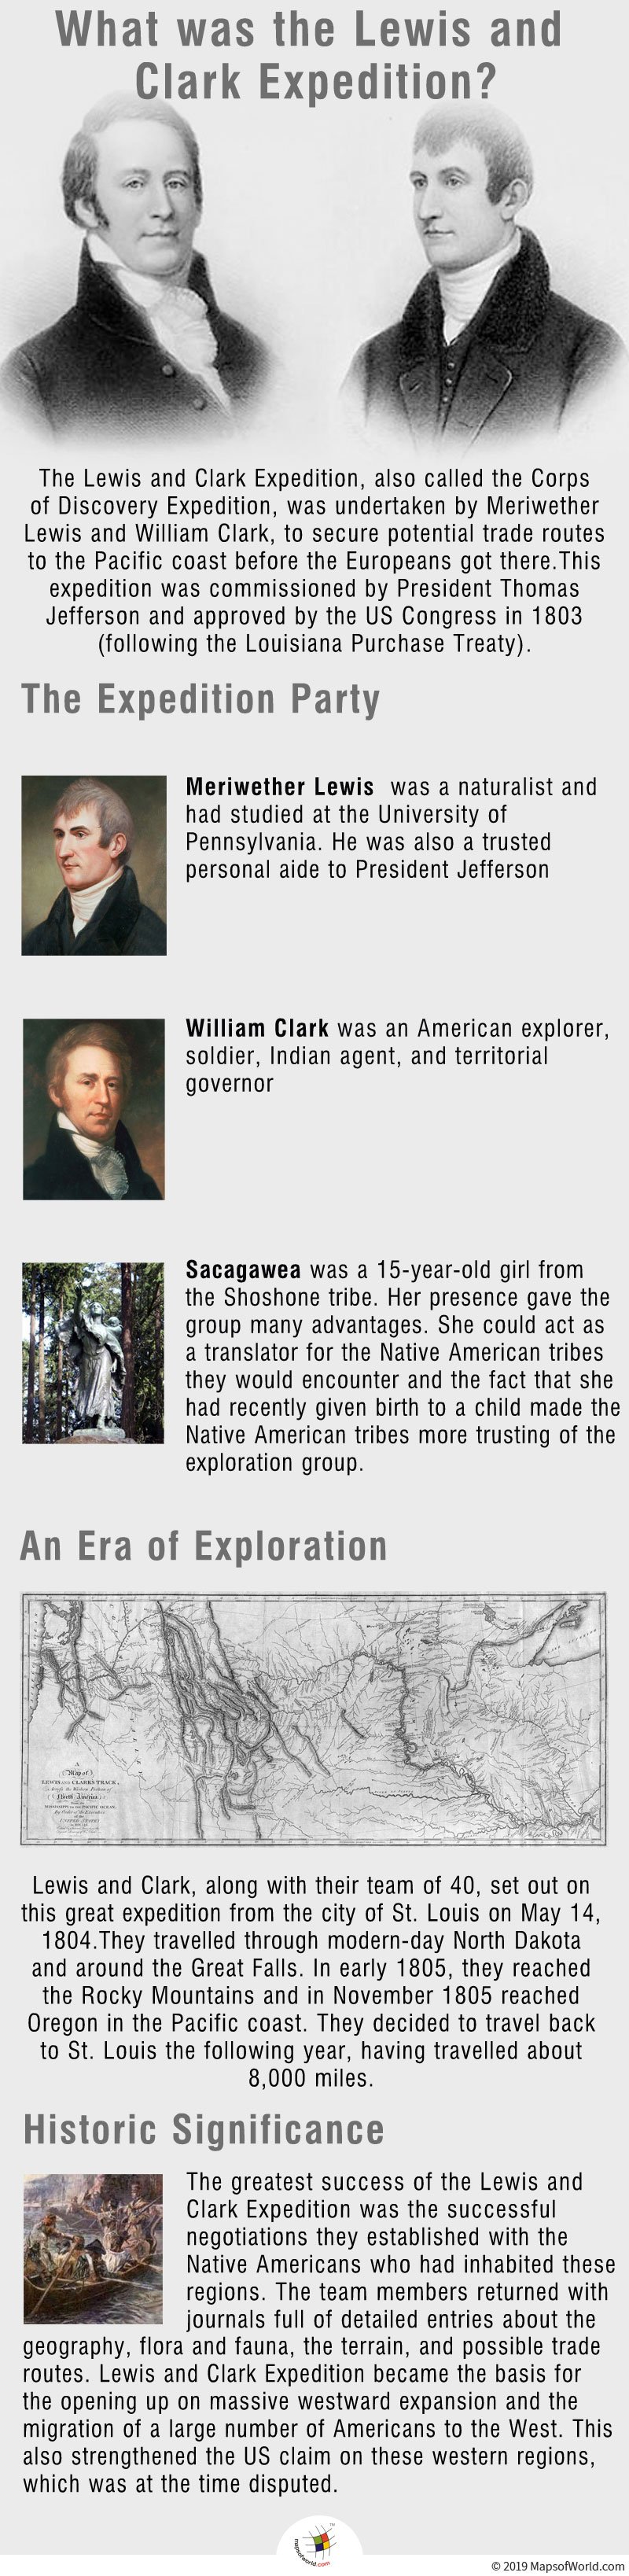 Infographic Giving Details on The Lewis and Clark Expedition